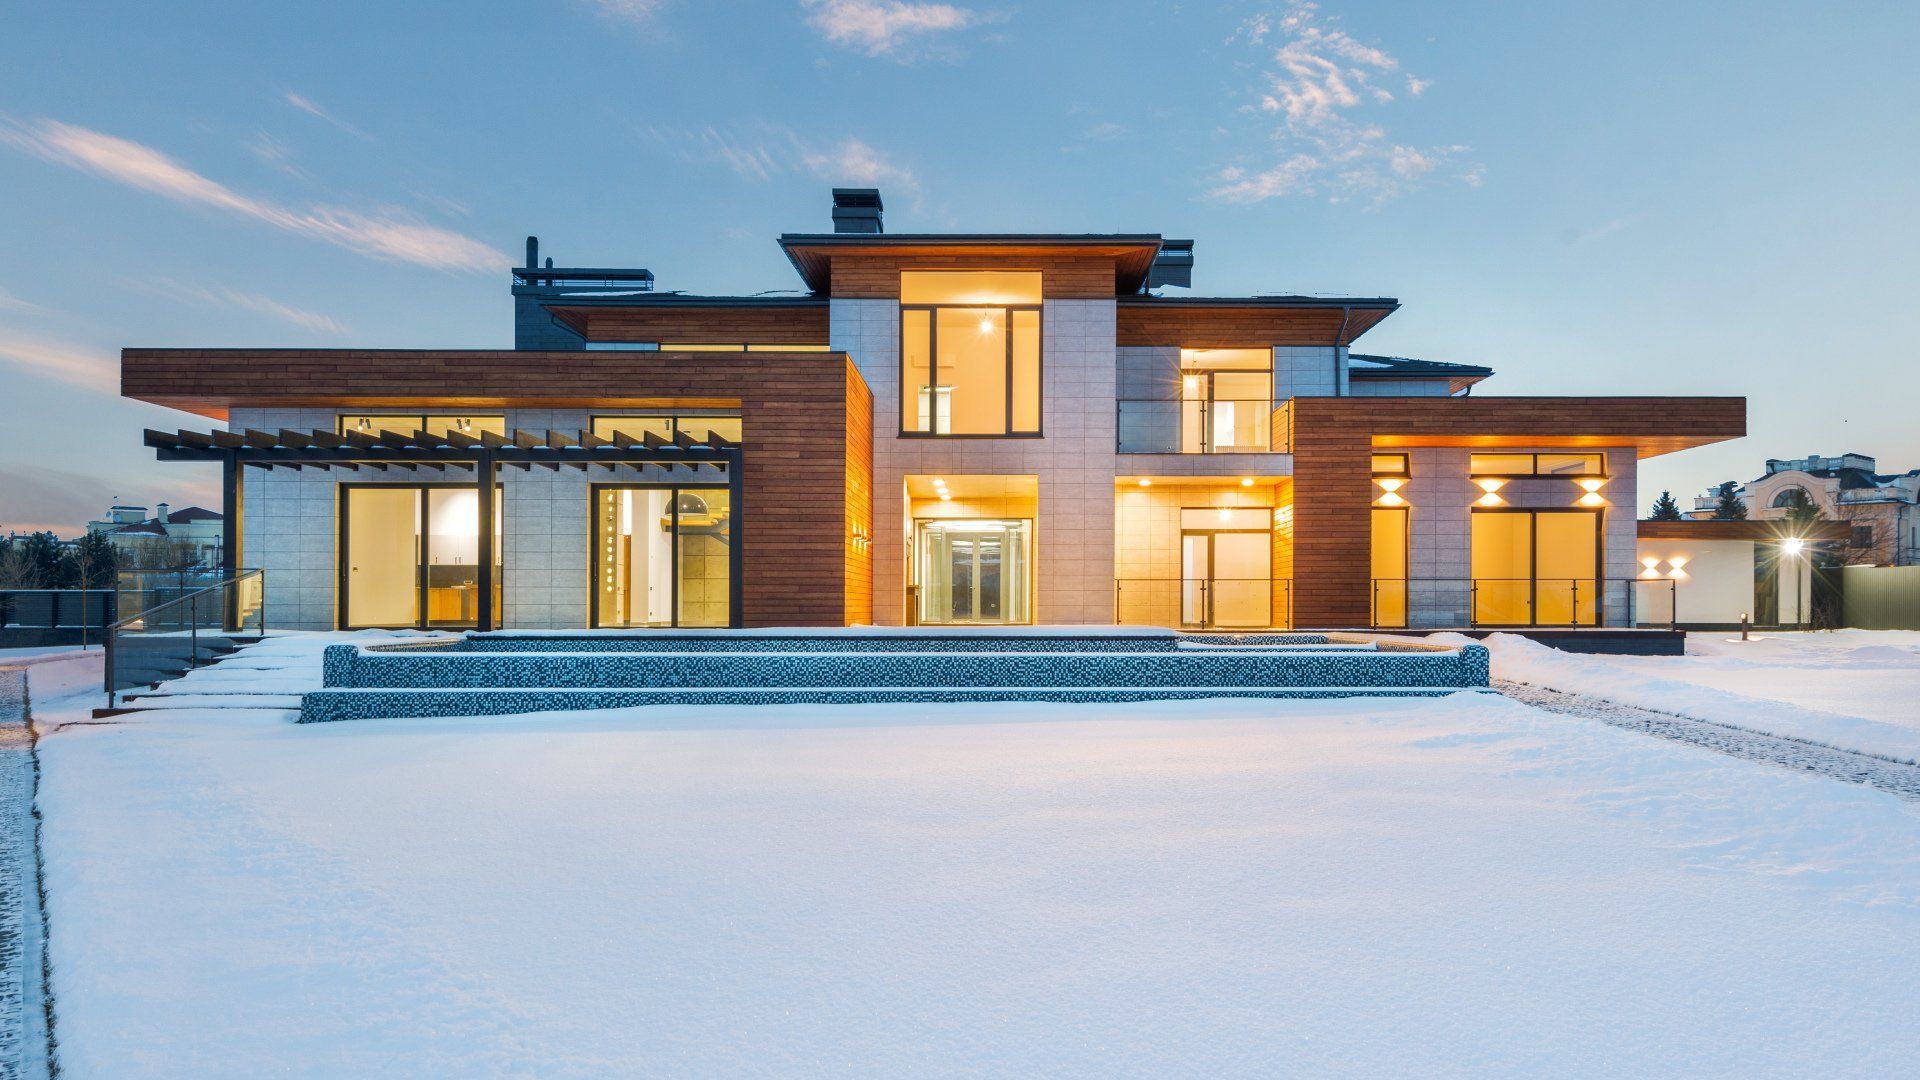 A large house with a lot of windows is sitting in the snow.